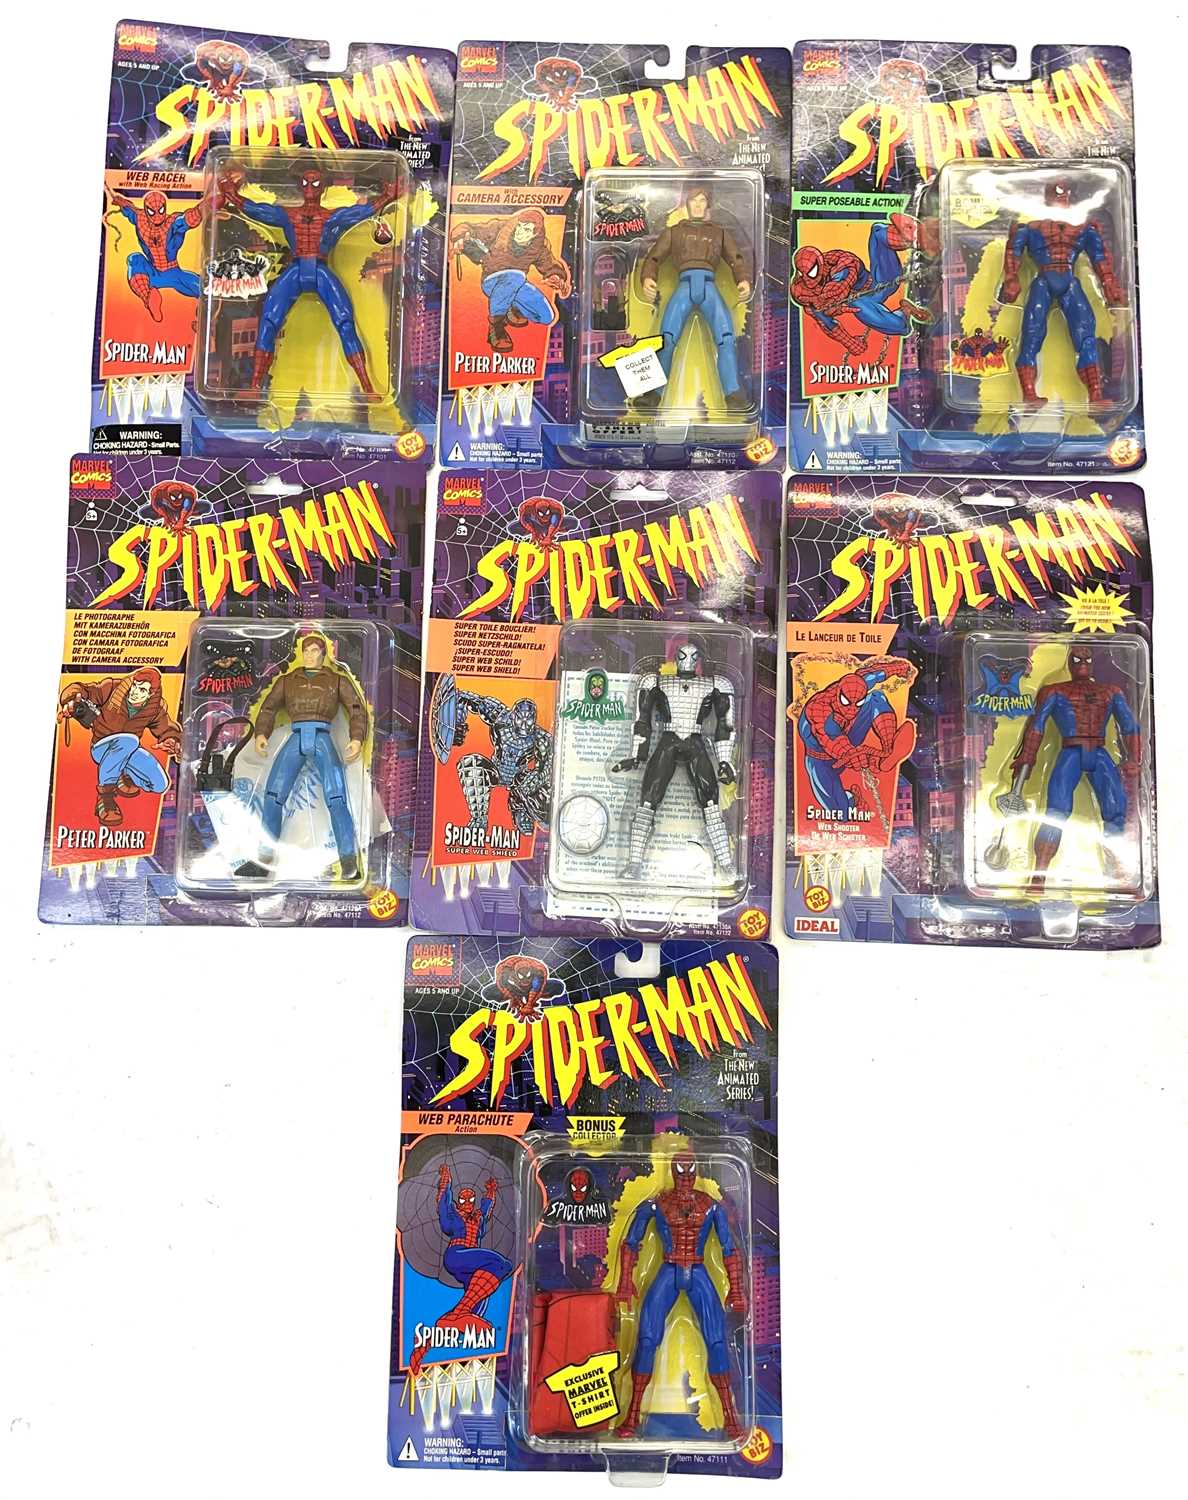 A mixed lot of highly collectible vintage 1990s ToyBiz Spider-Man collectible figurines in